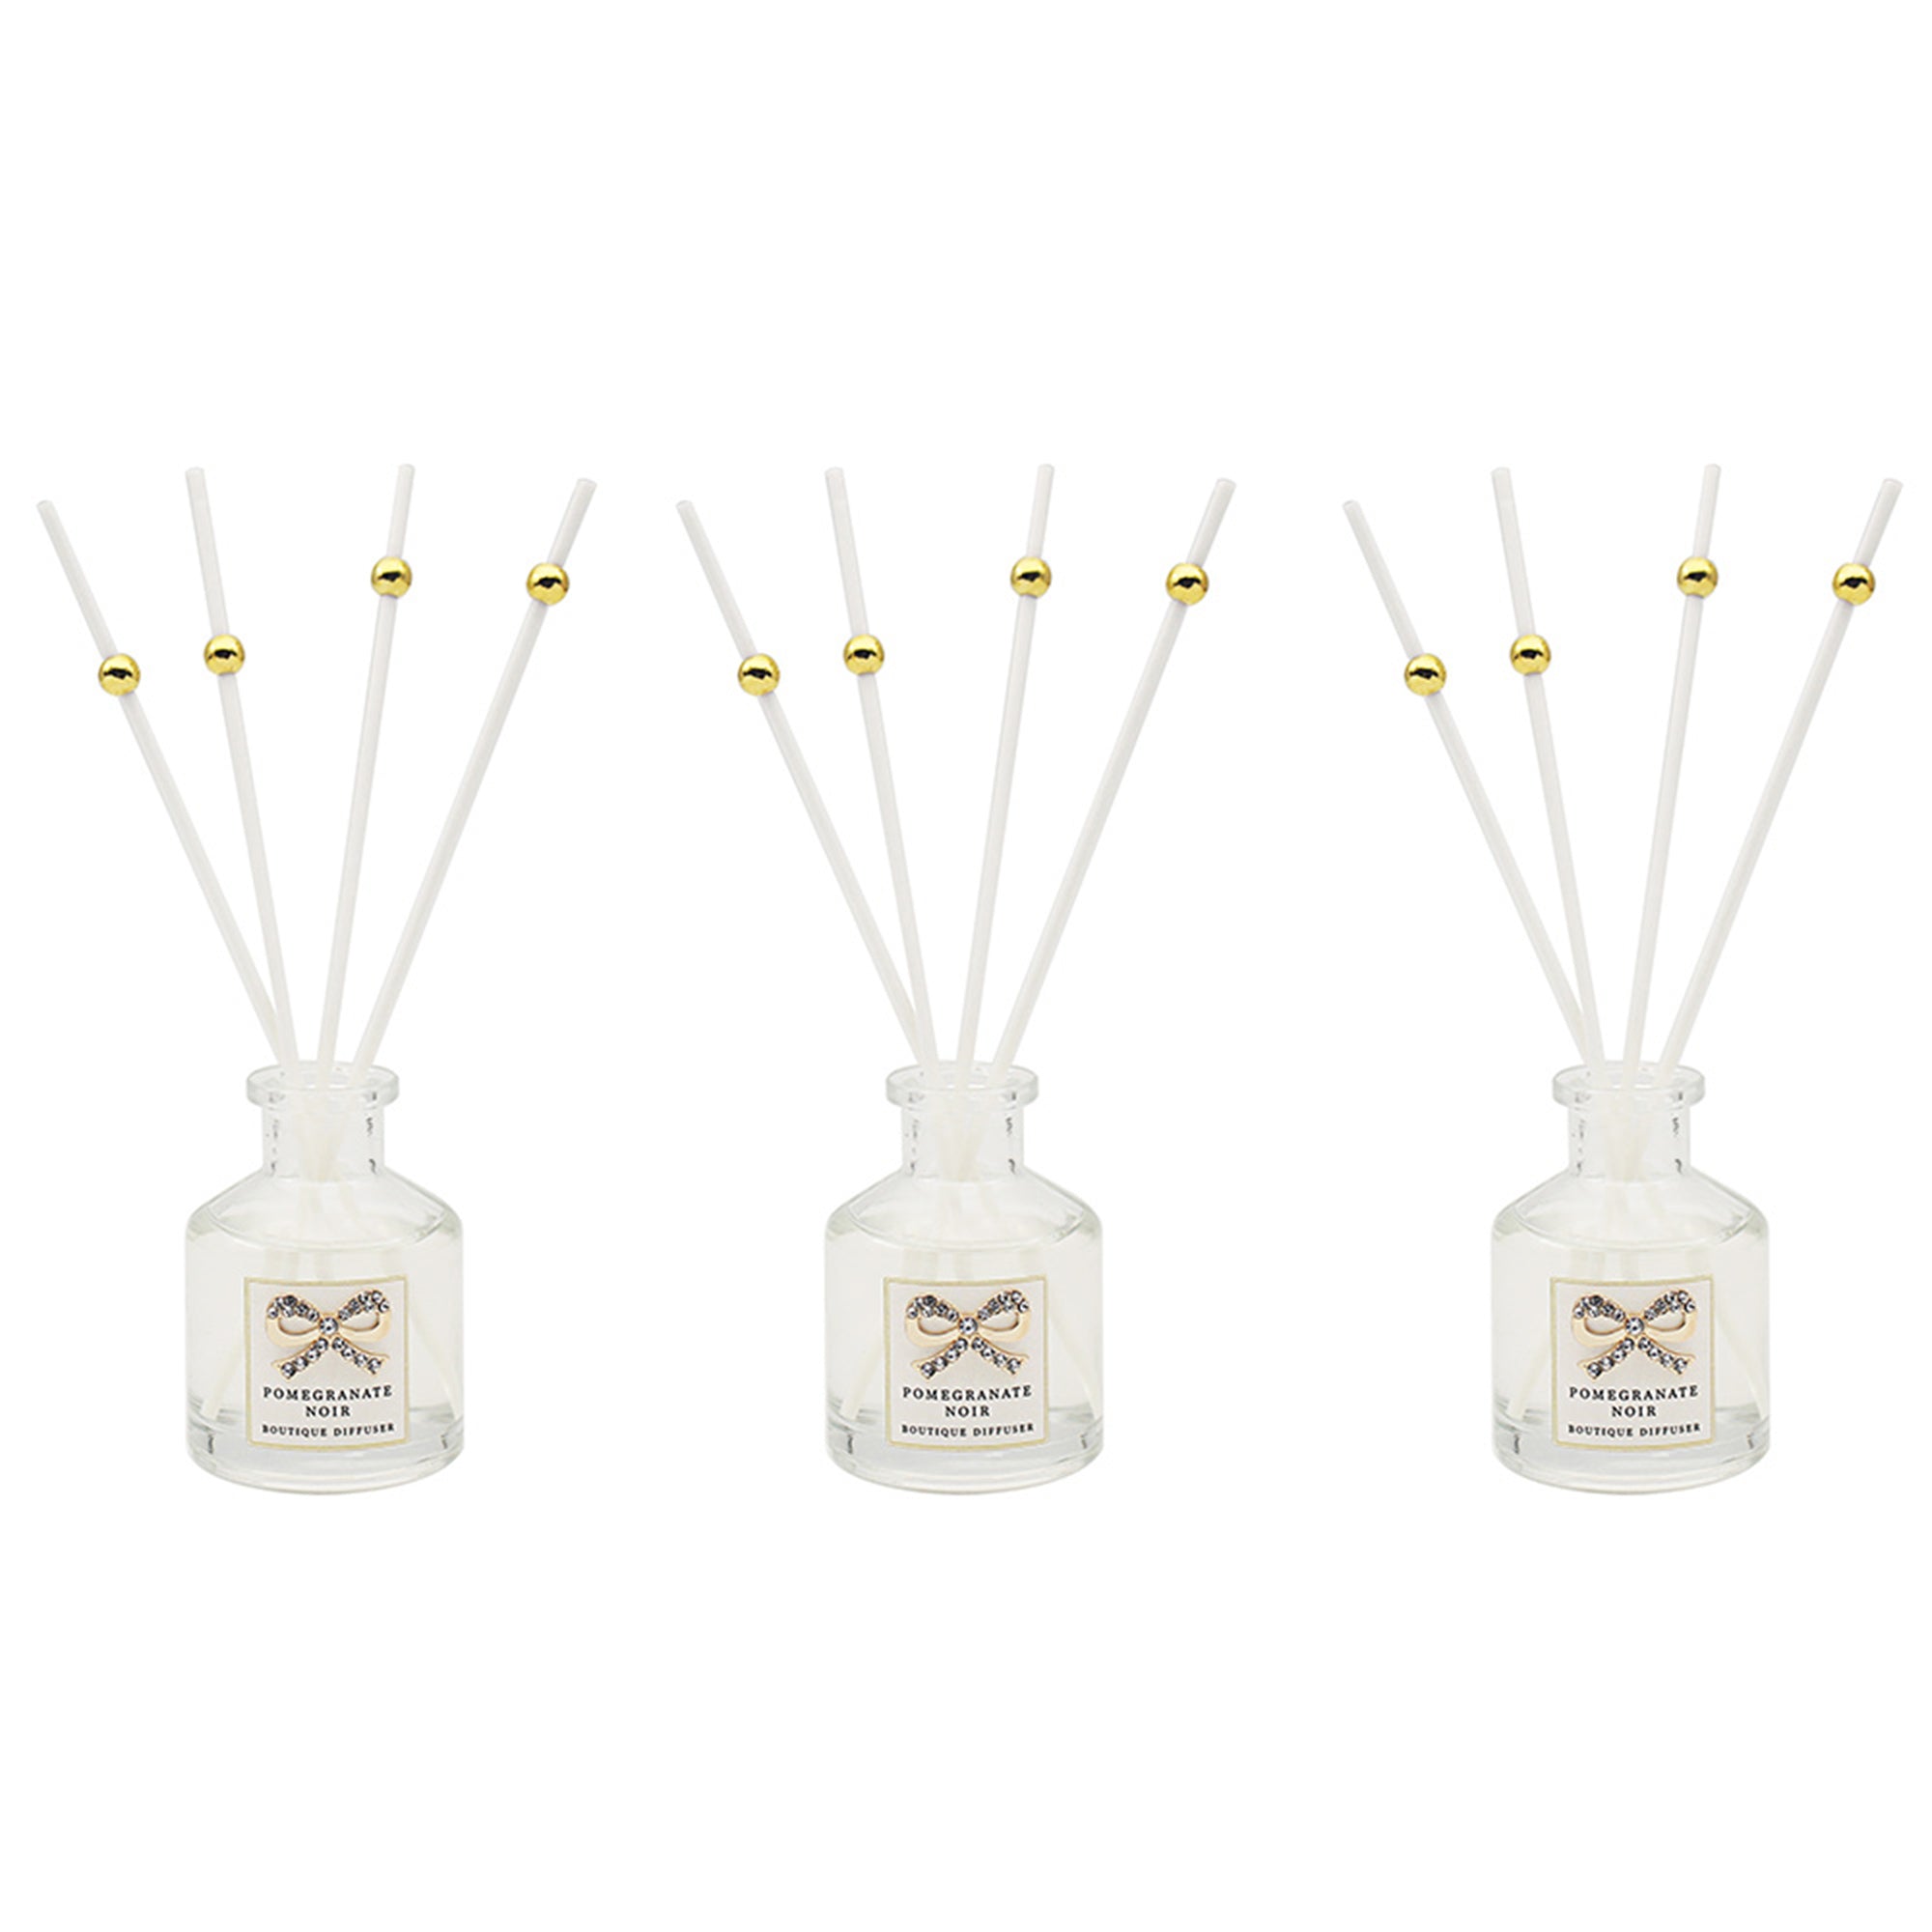 Pomegranate Noir Diffusers - Set of 3